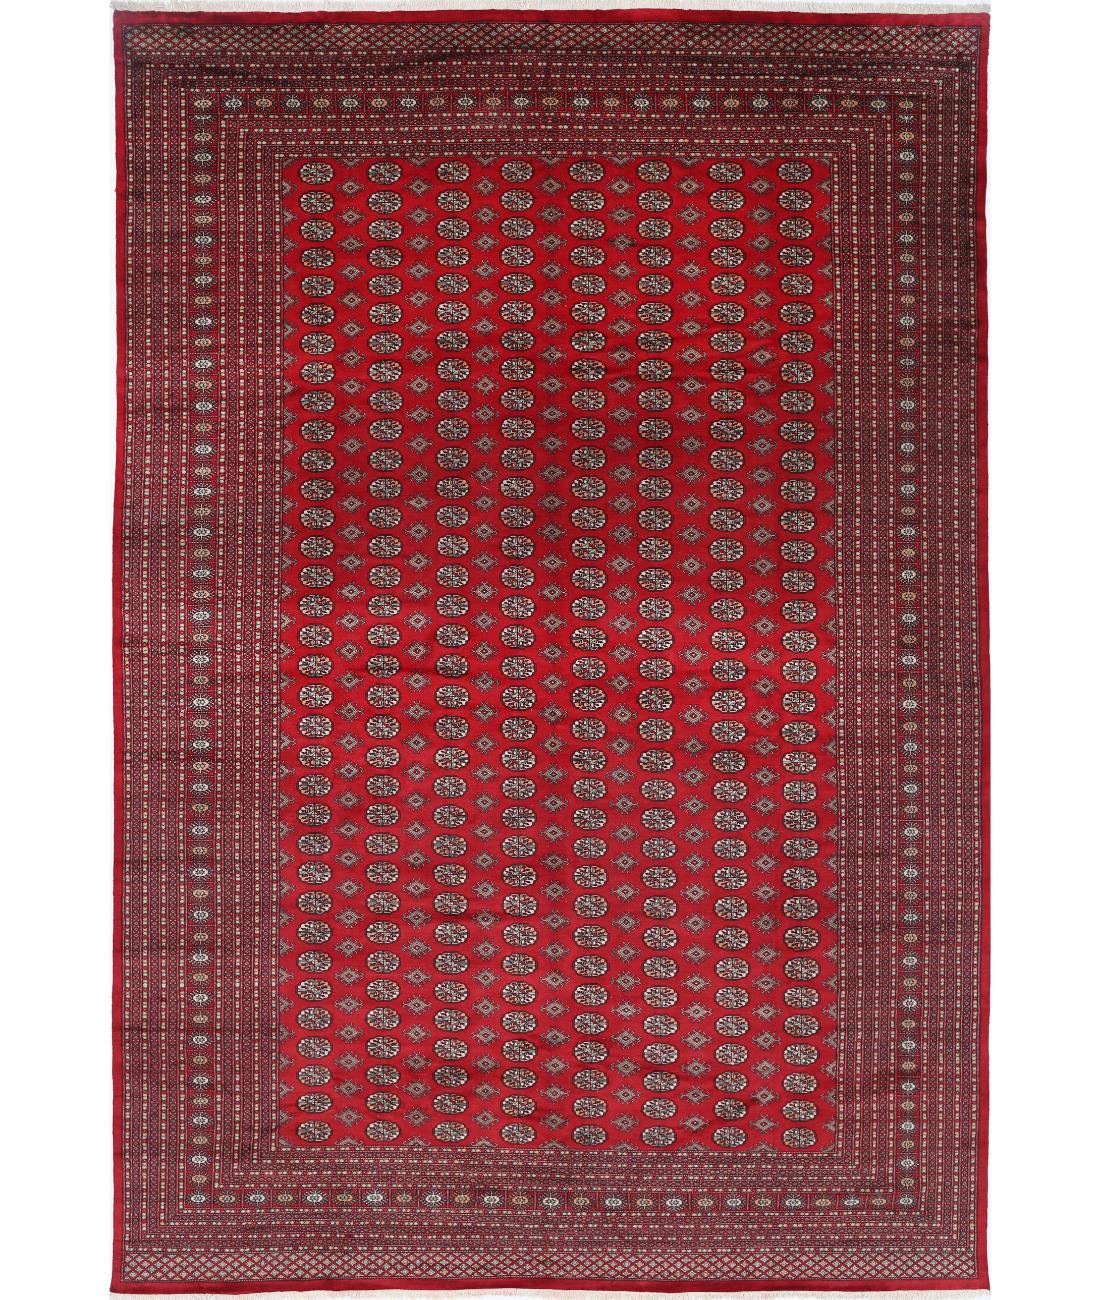 Bokhara 12' 0" X 17' 10" Hand-Knotted Wool Rug 12' 0" X 17' 10" (366 X 544) / Red / Black